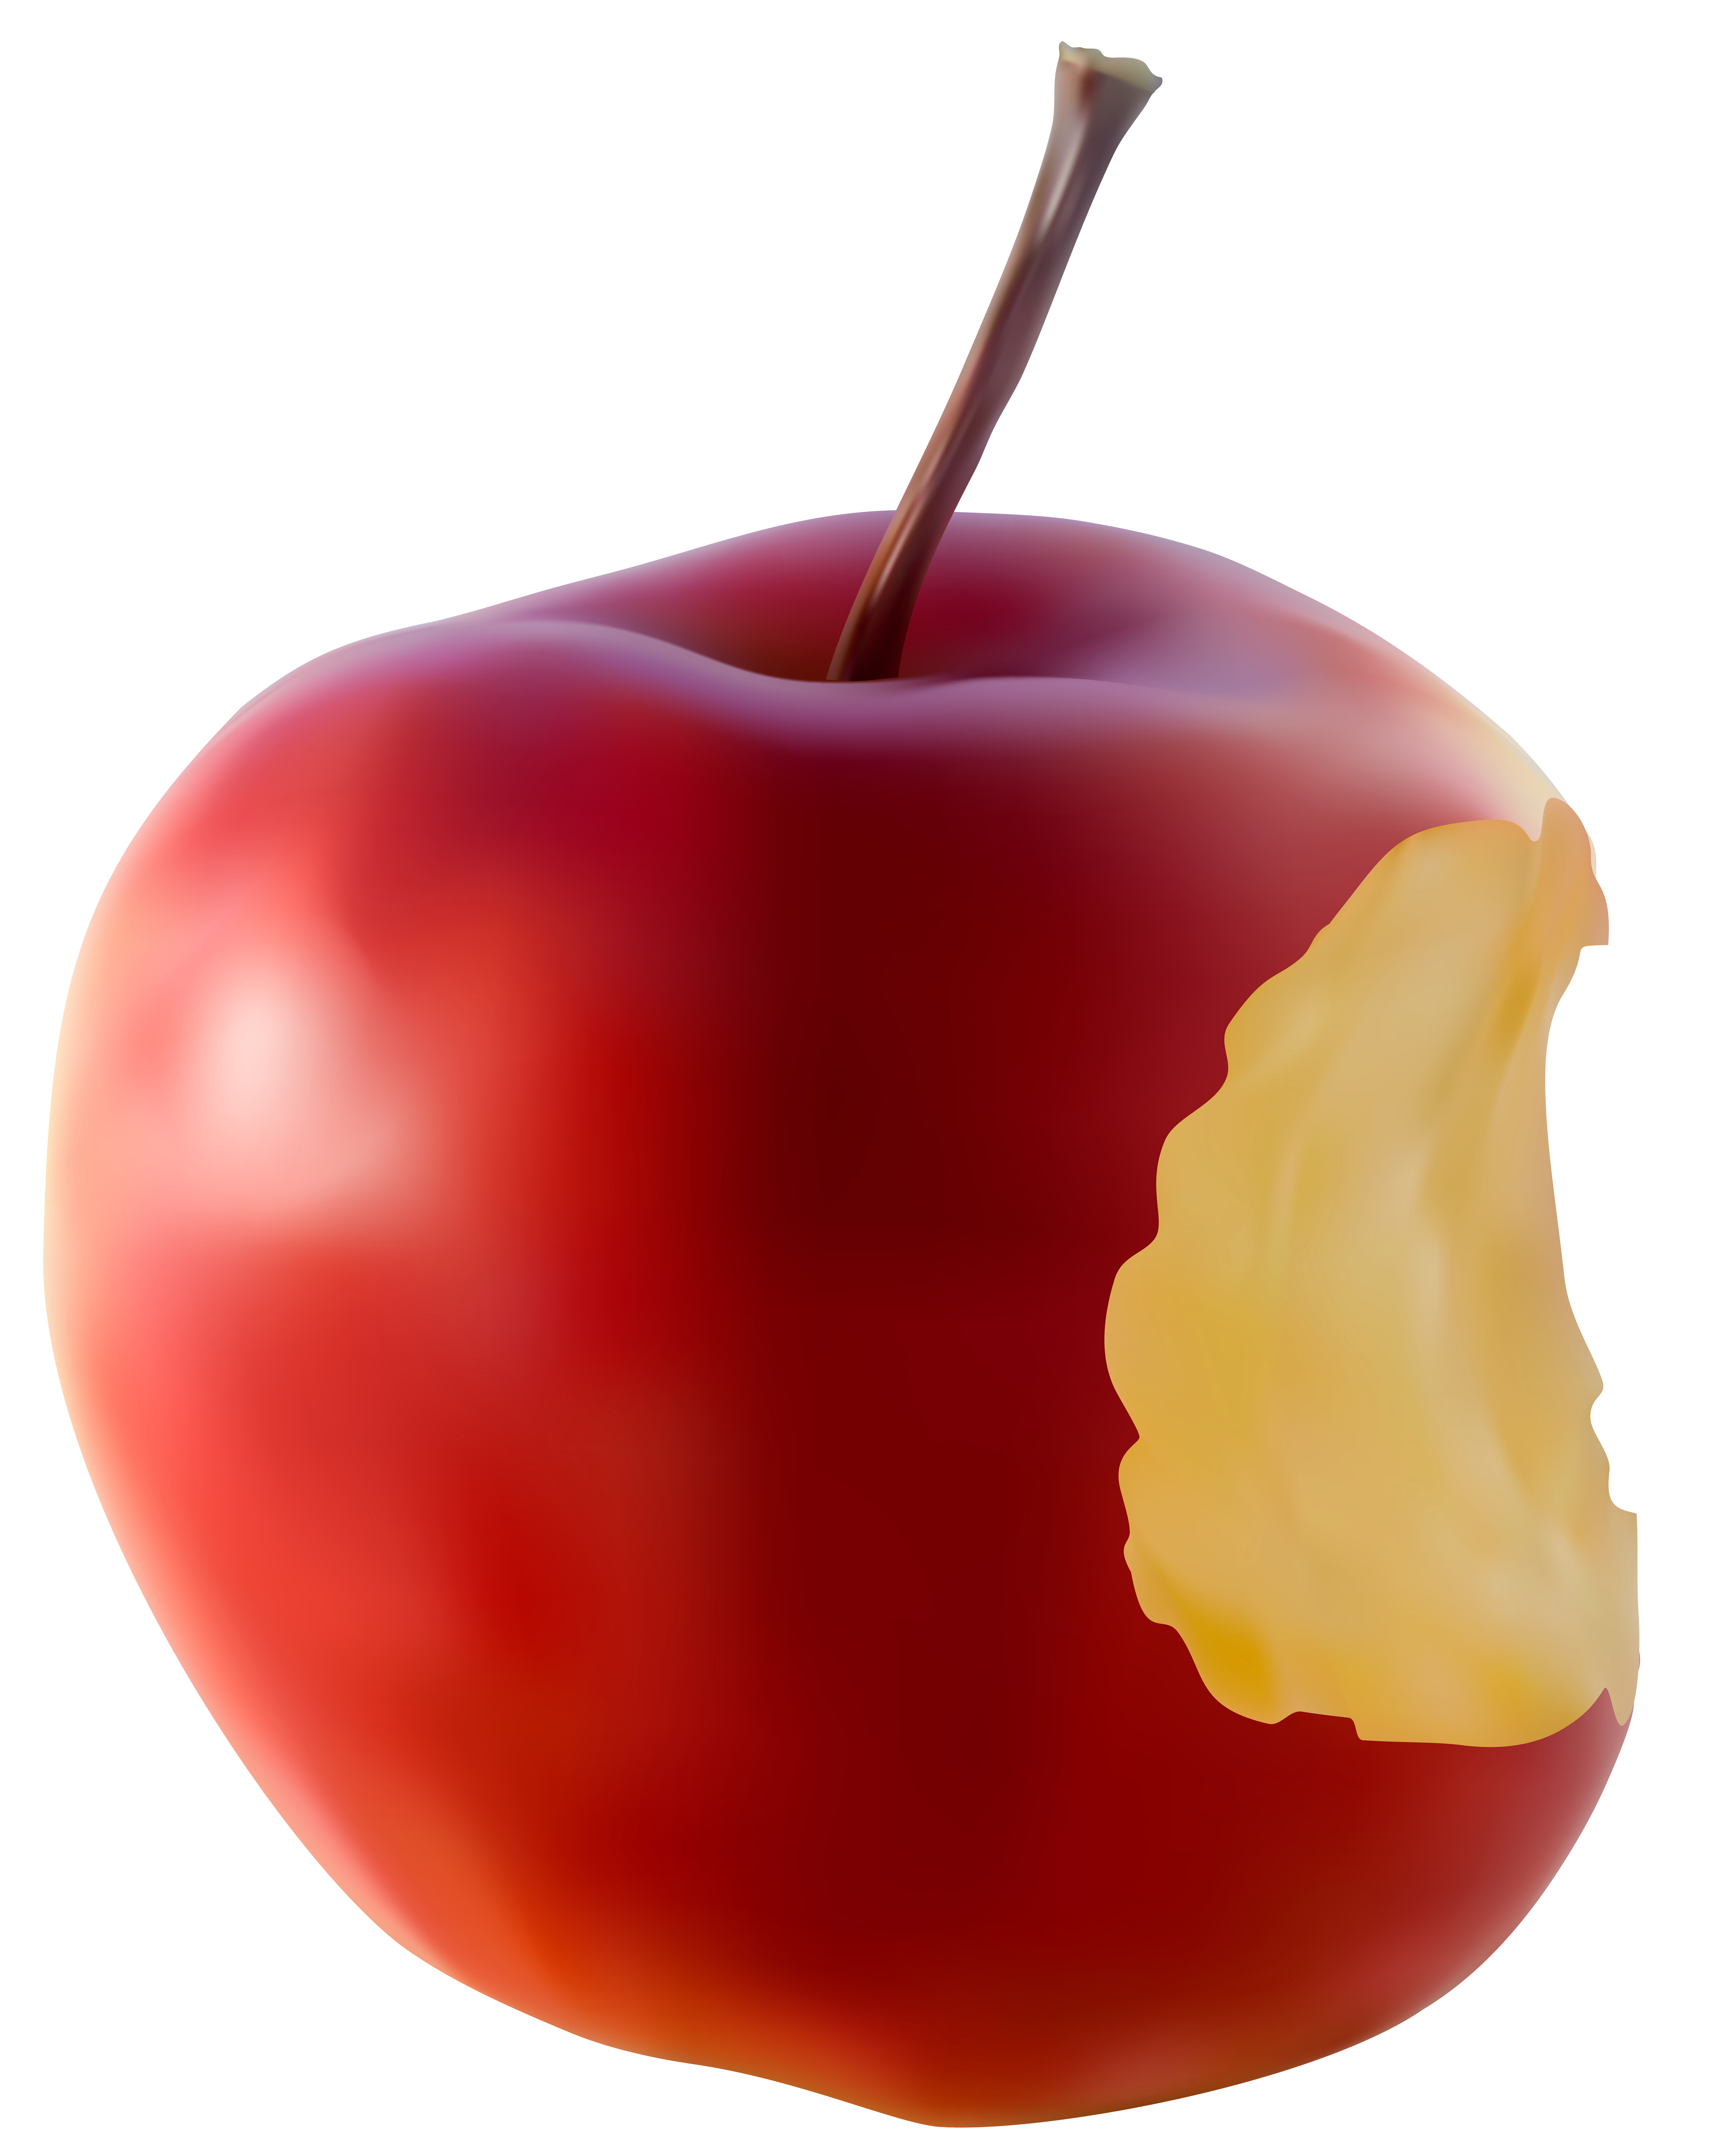 Fresh Red Apple PNG Clip Art Image​